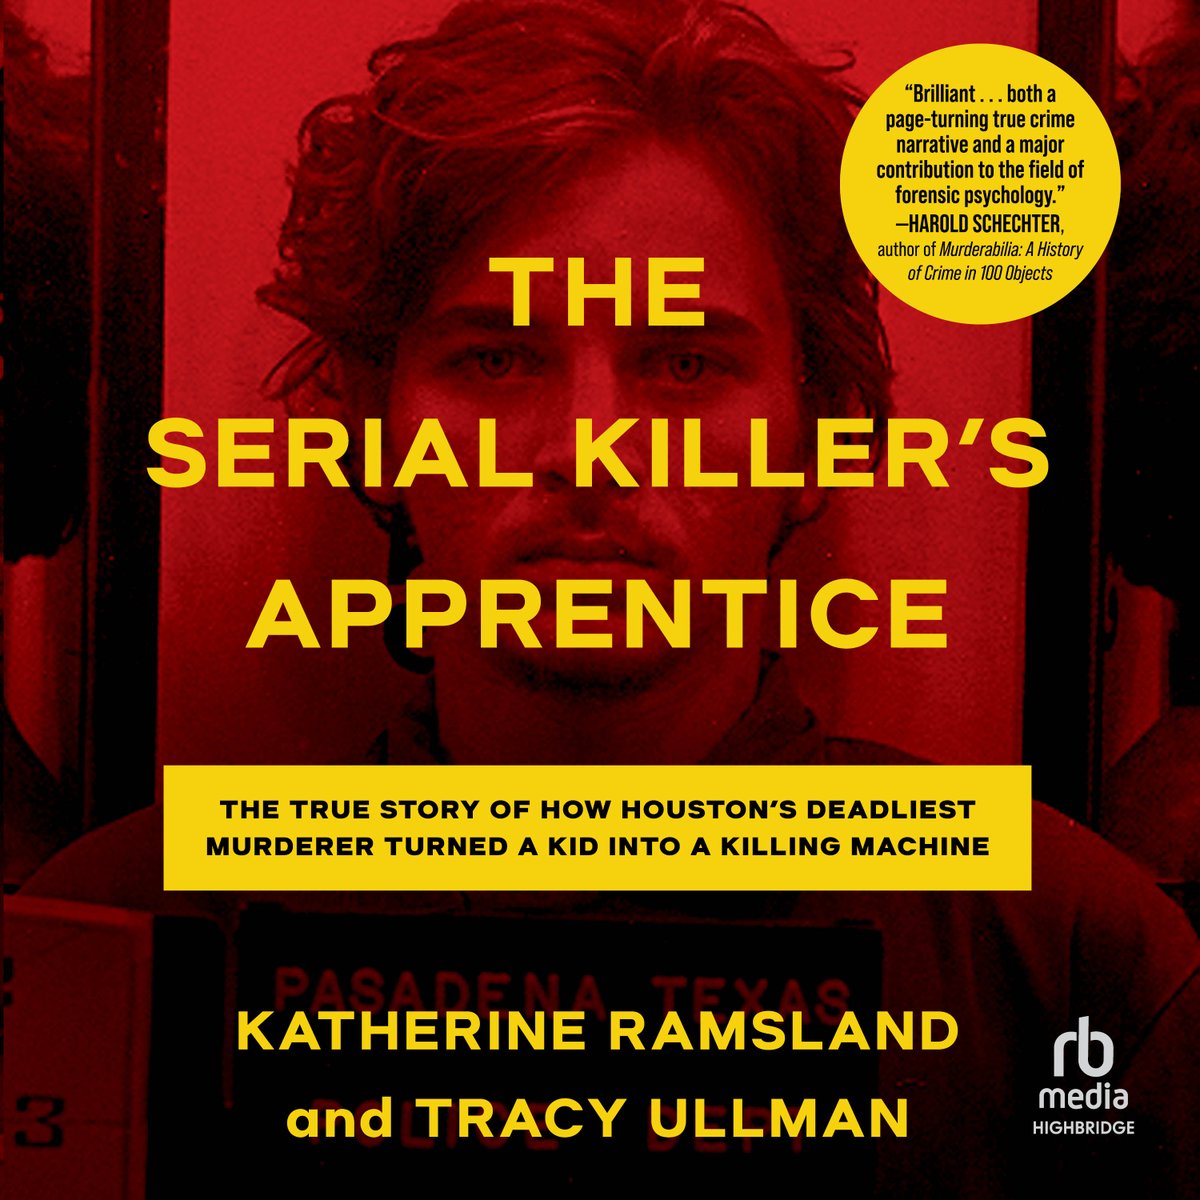 The blurred line between victim and accomplice—and how a killer can be created. highbridgeaudio.com/theserialkille… performed by @ChrisDelaine #newrelease #audiobook #truecrime #serialkillers @KatRamsland